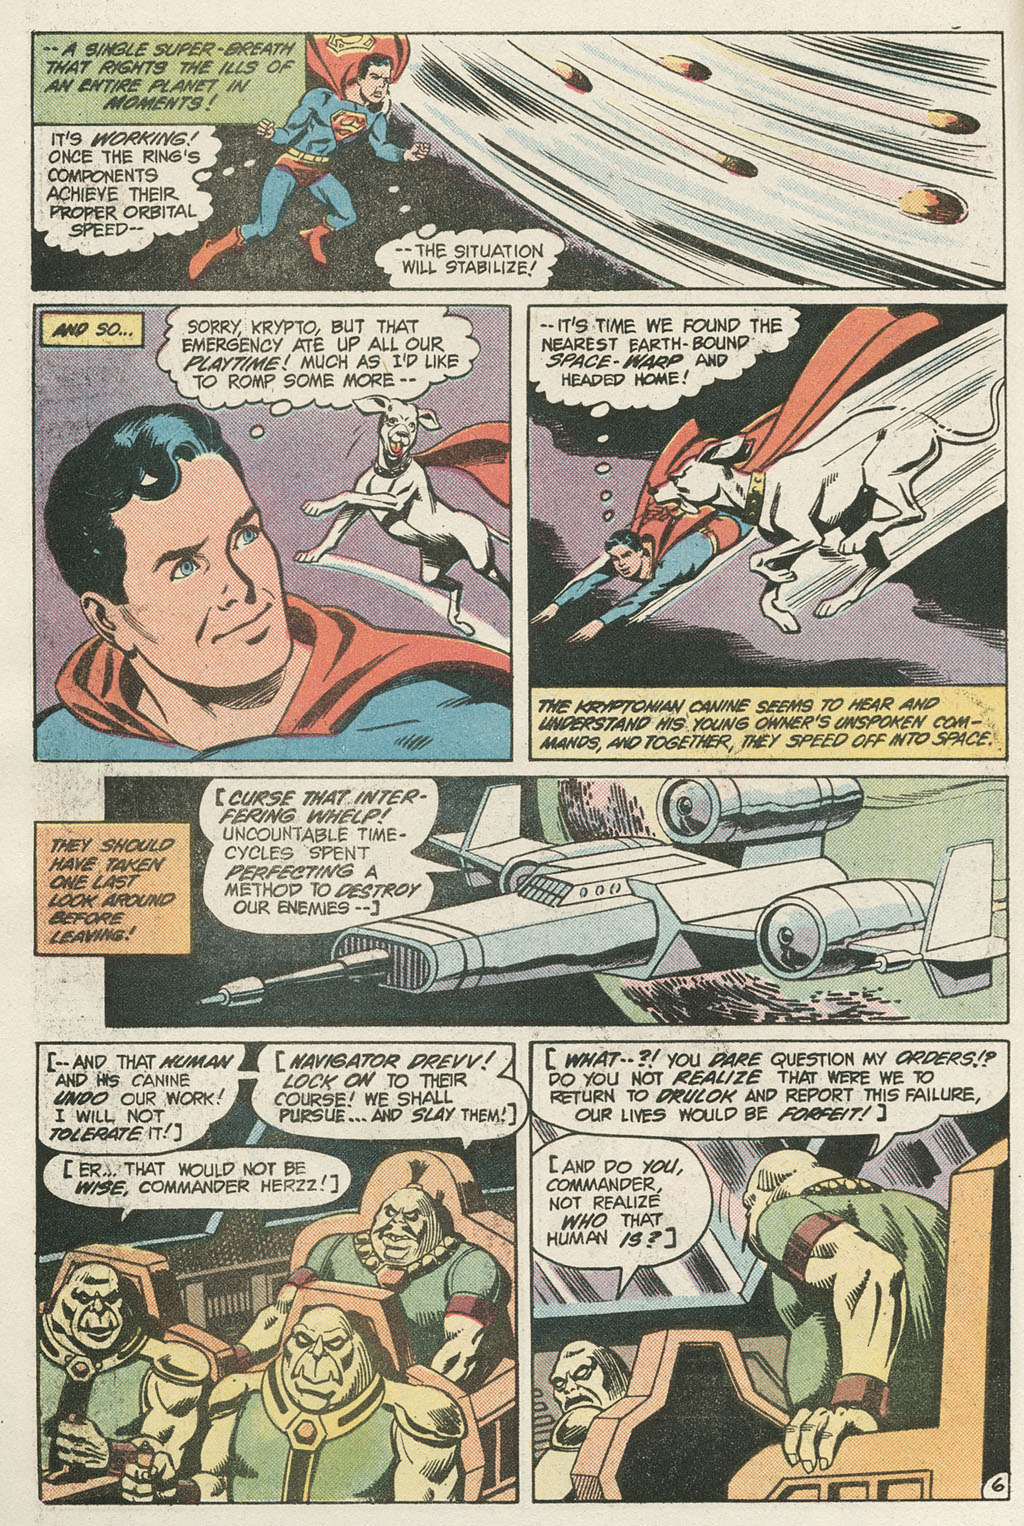 The New Adventures of Superboy 53 Page 8